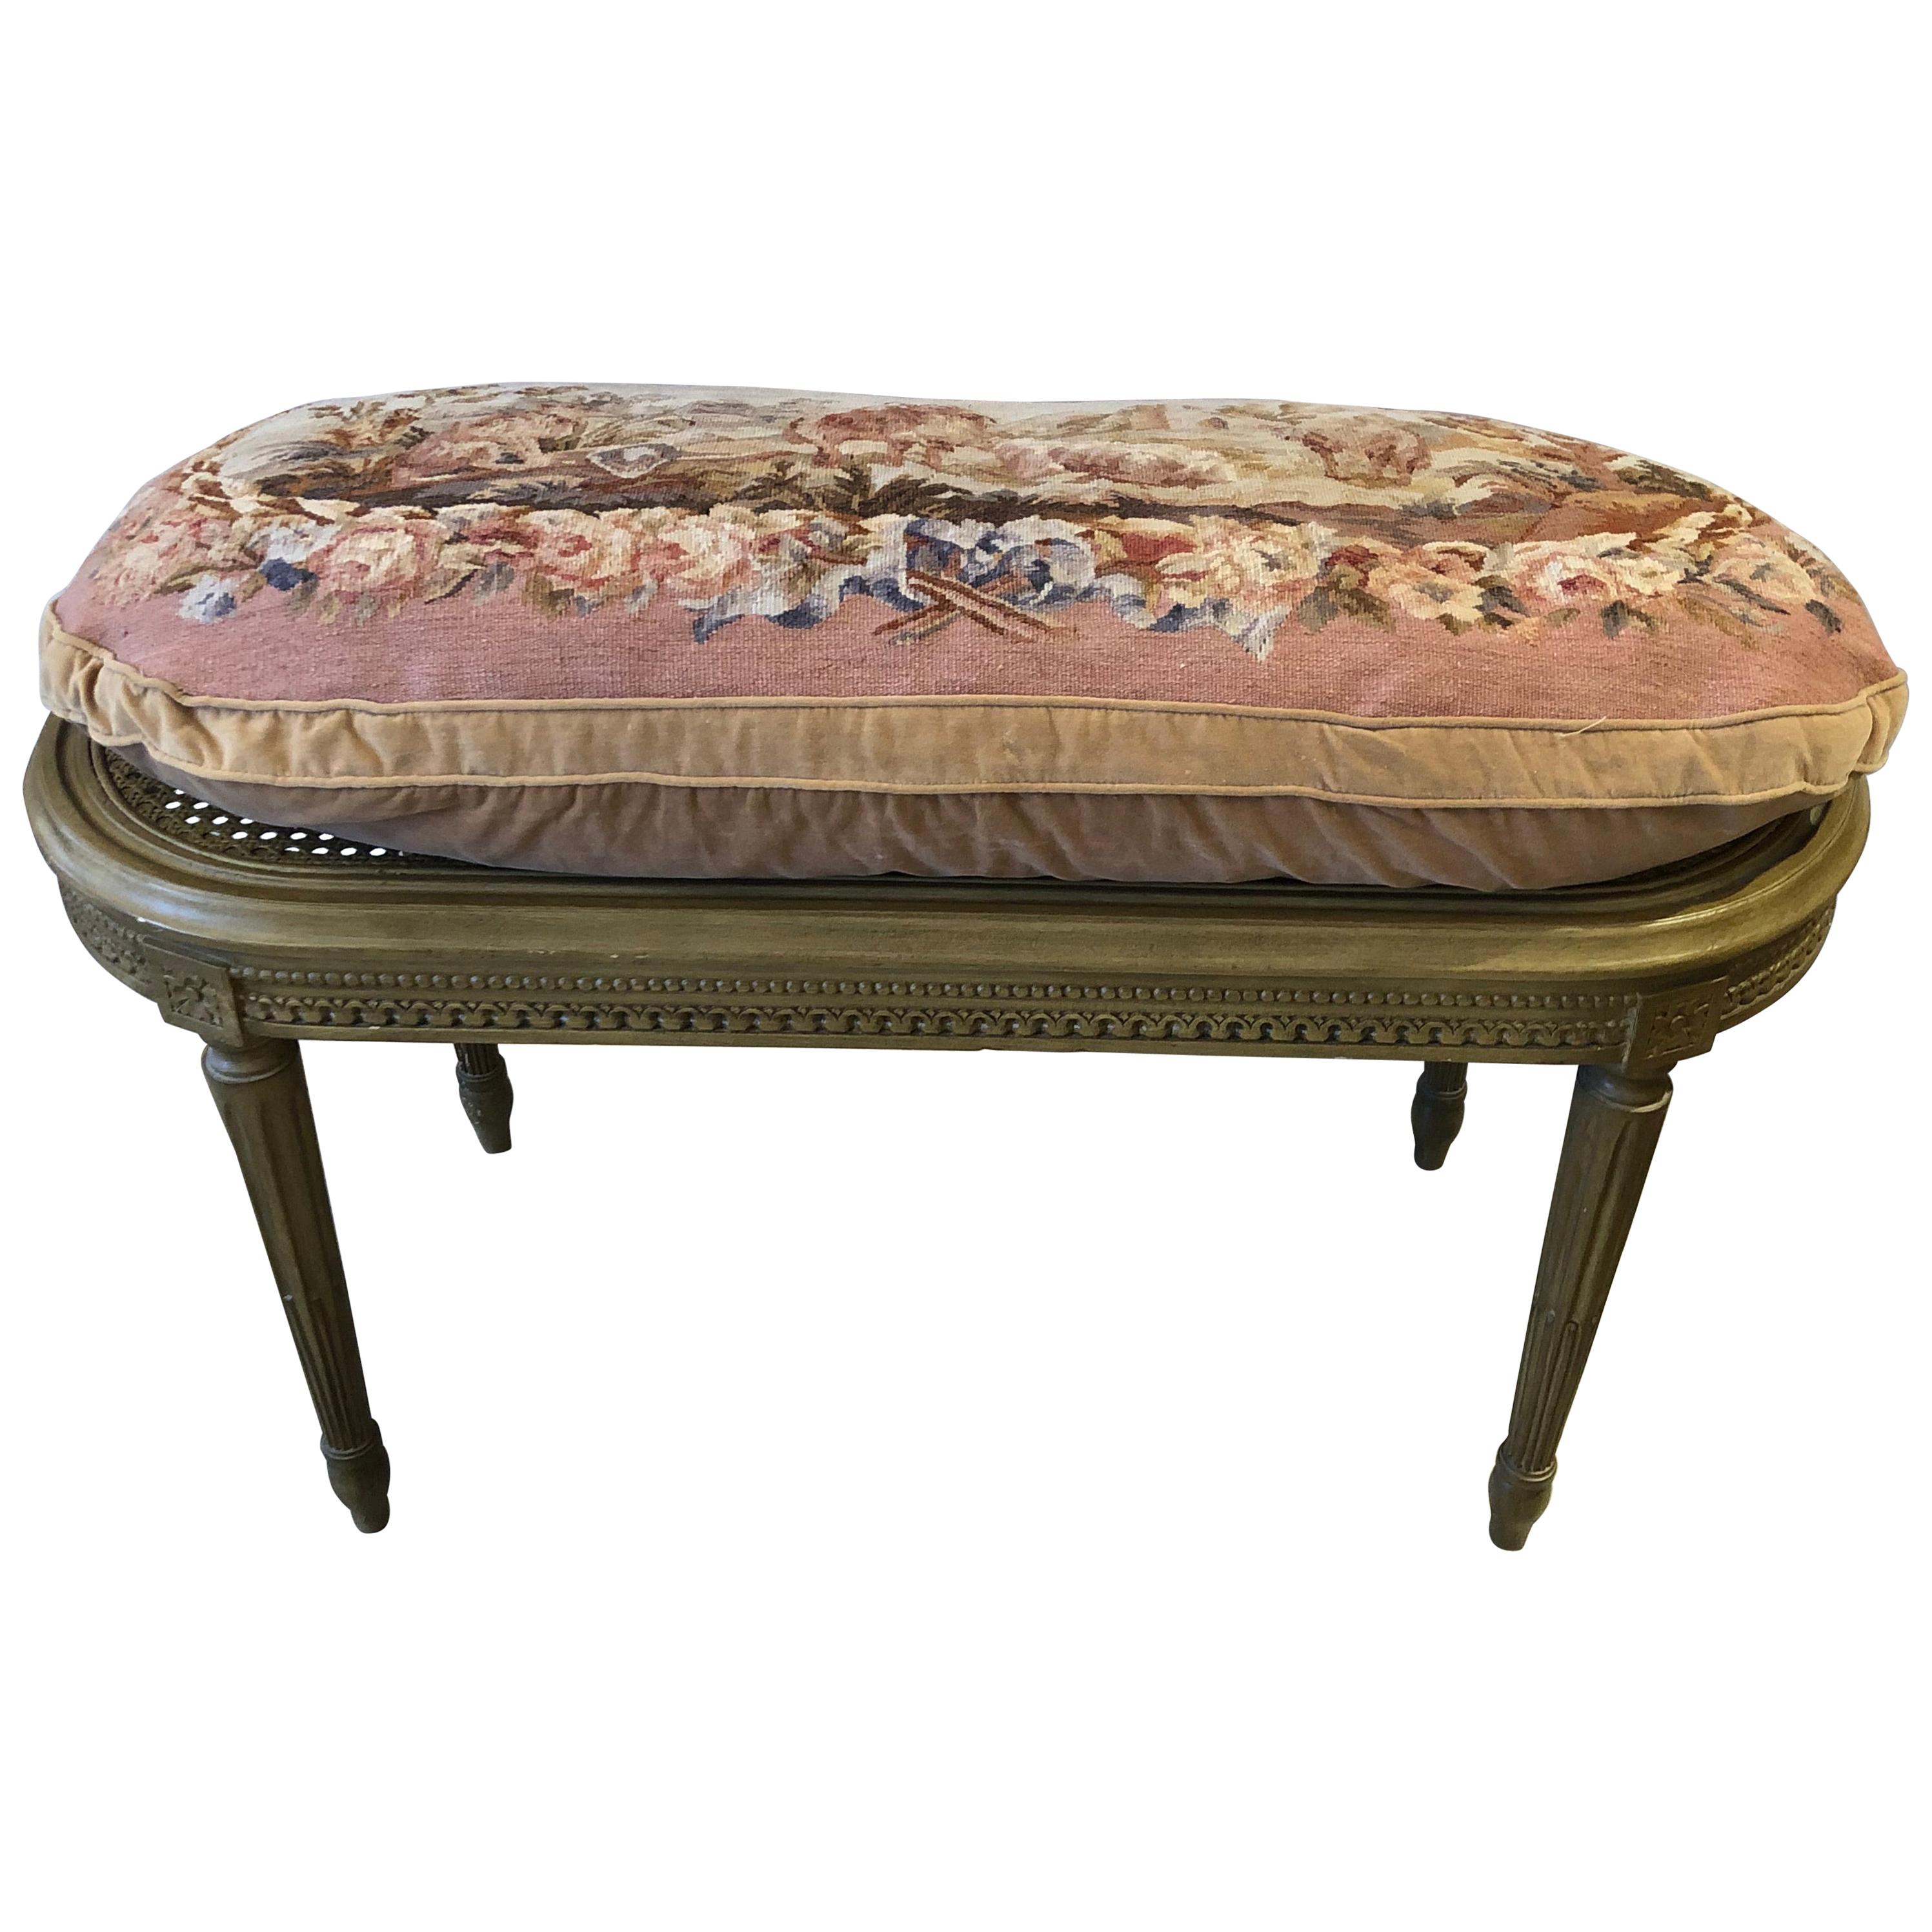 Very Pretty French Beige Painted Oval Caned Bench with Custom Tapestry Cushion